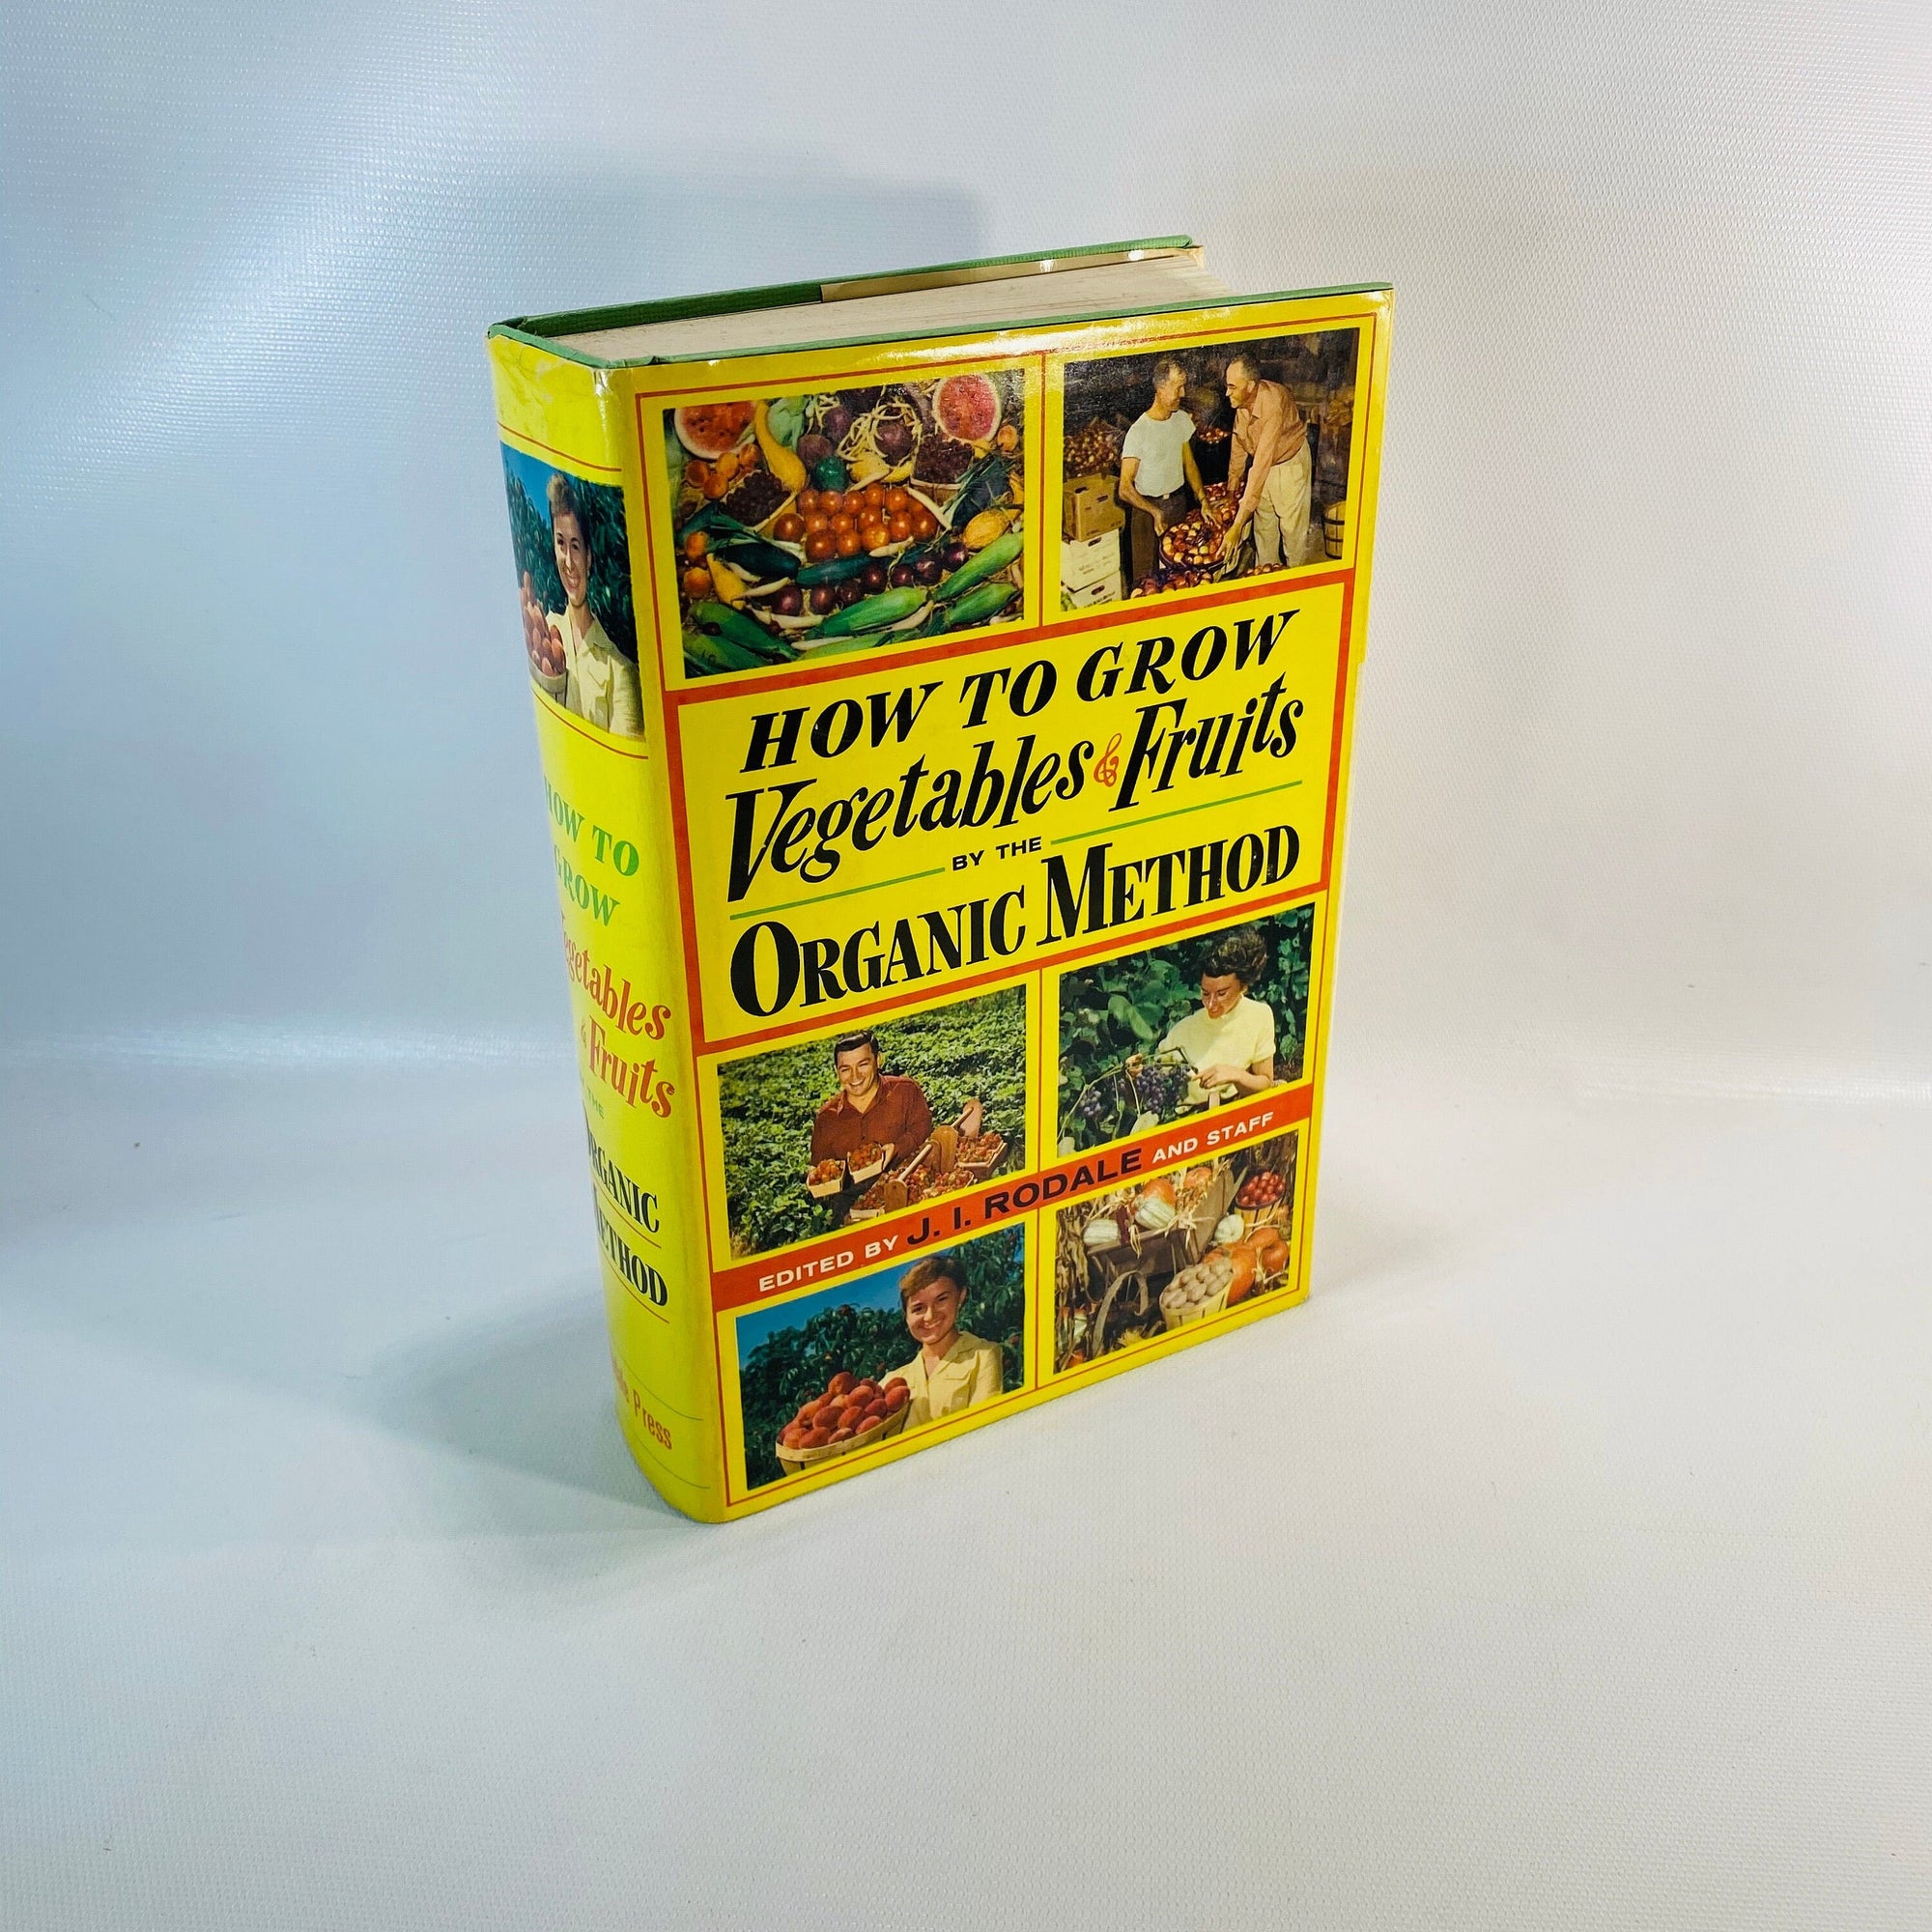 How to Grow Vegetables & Fruits by the Organic Method by J.I. Rodale 1961